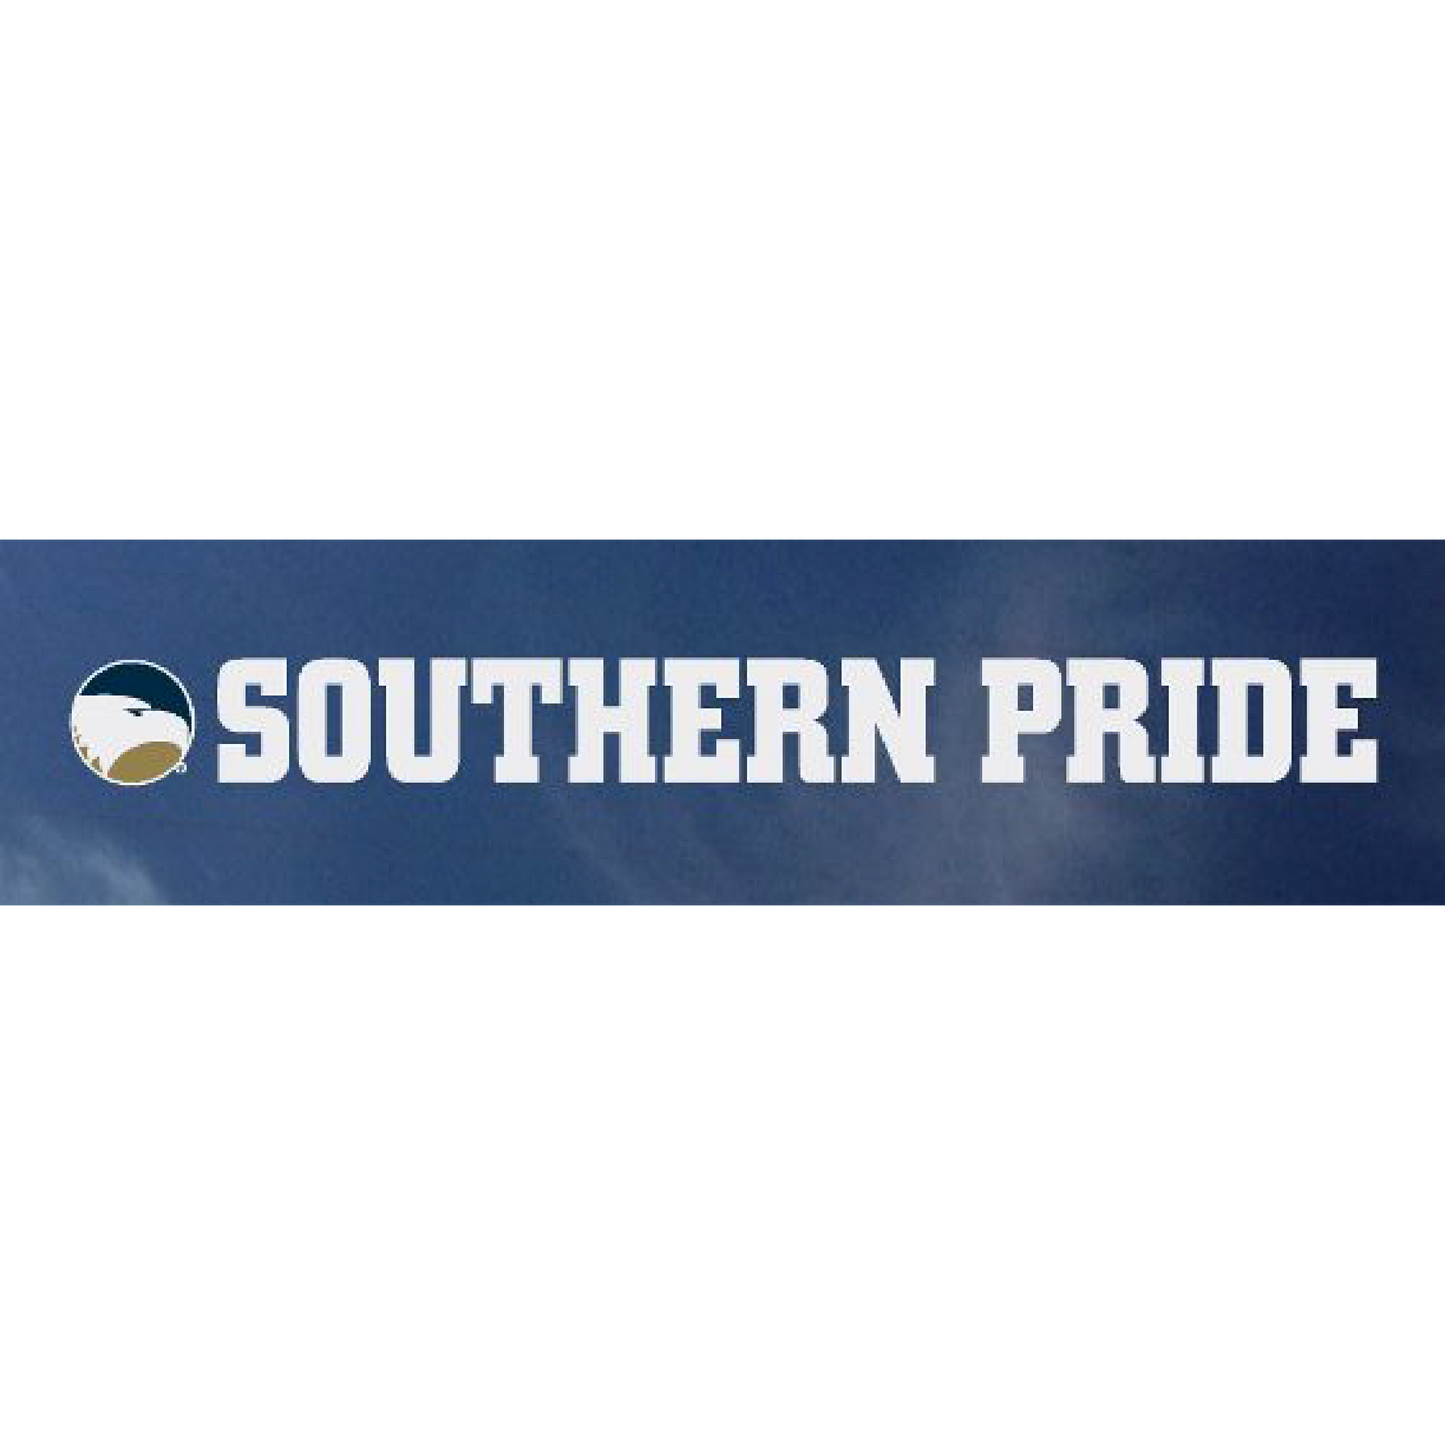 Southern Pride Decal Sticker - 15"